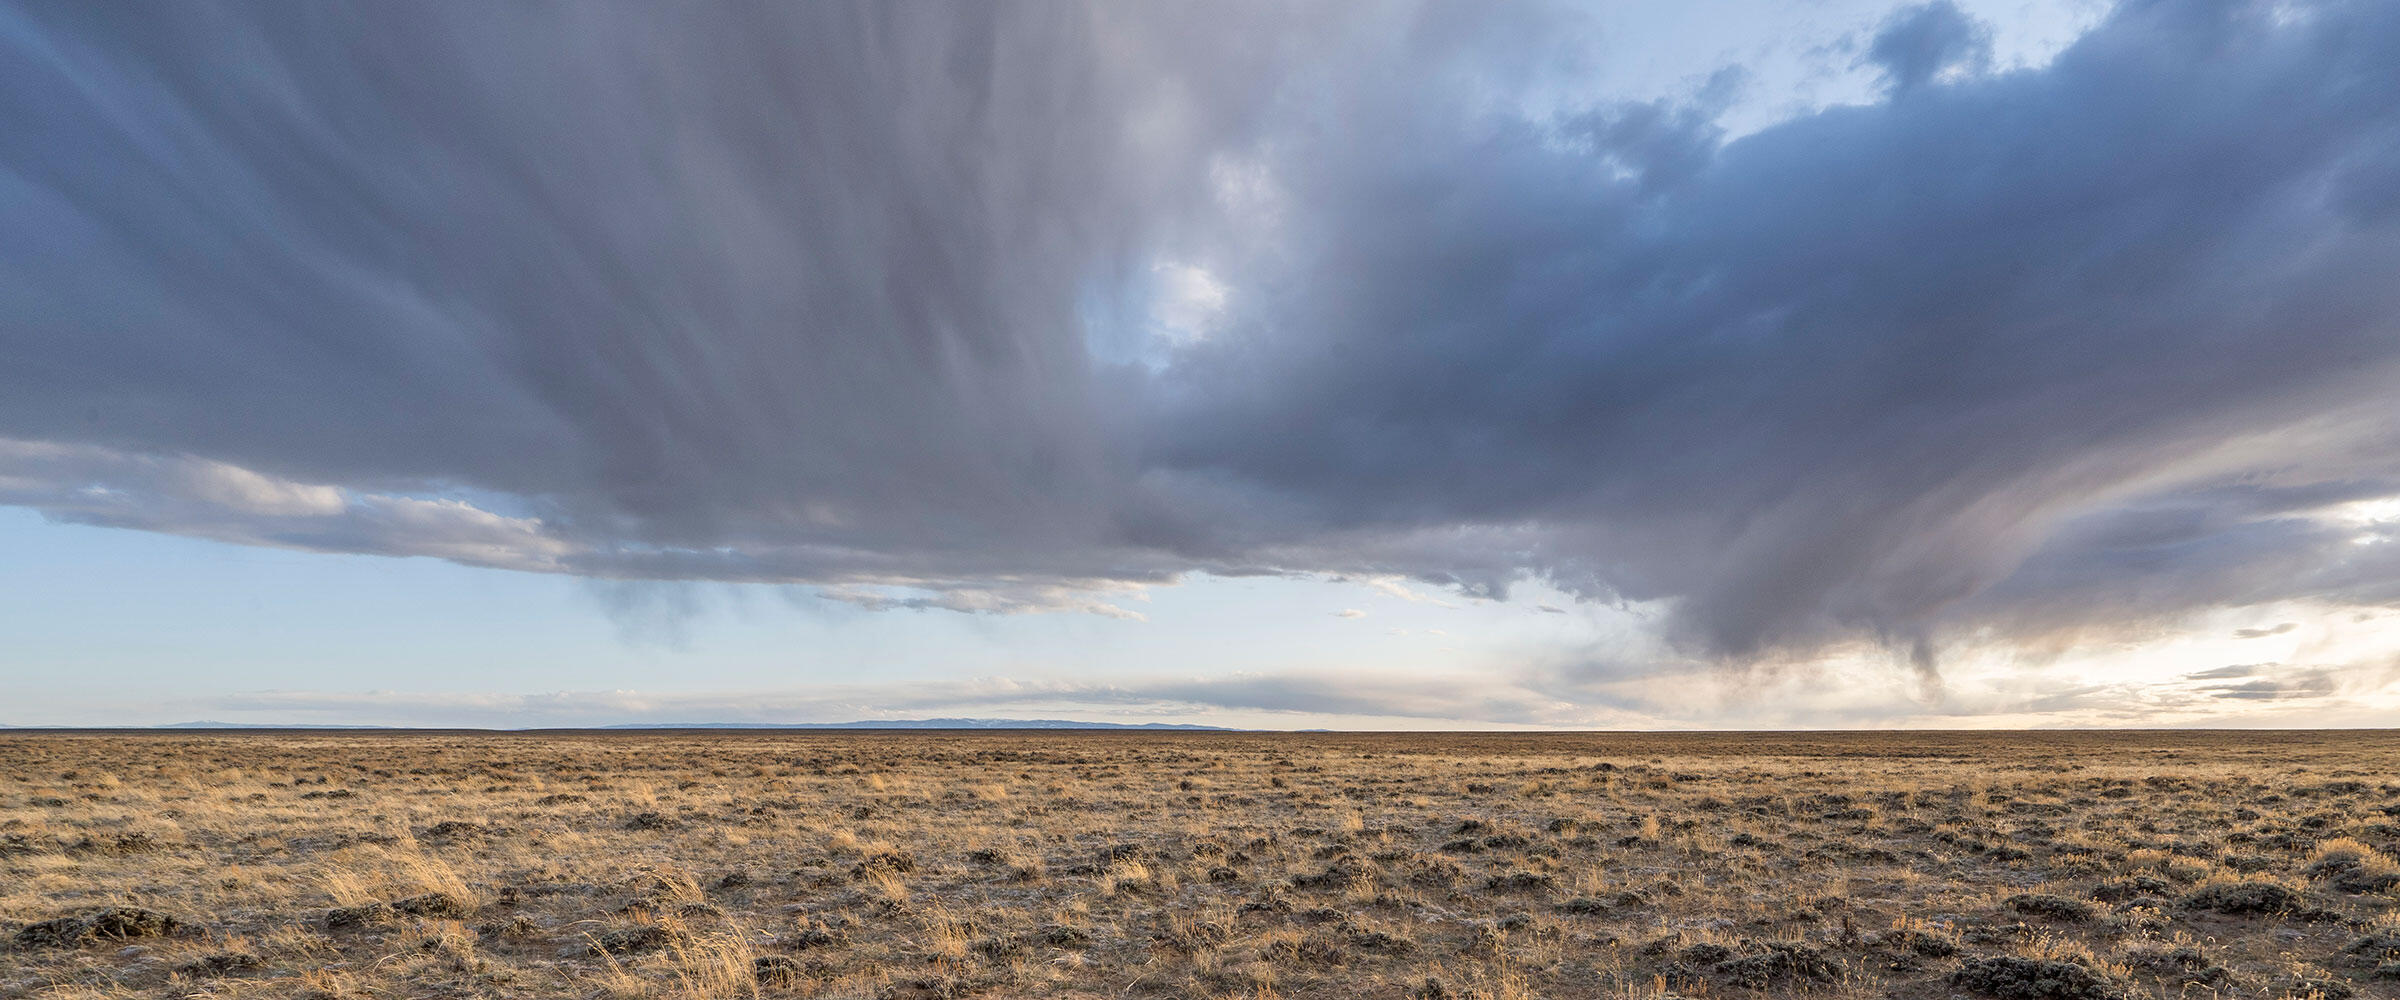 Storm clouds over sagebrush steppe.